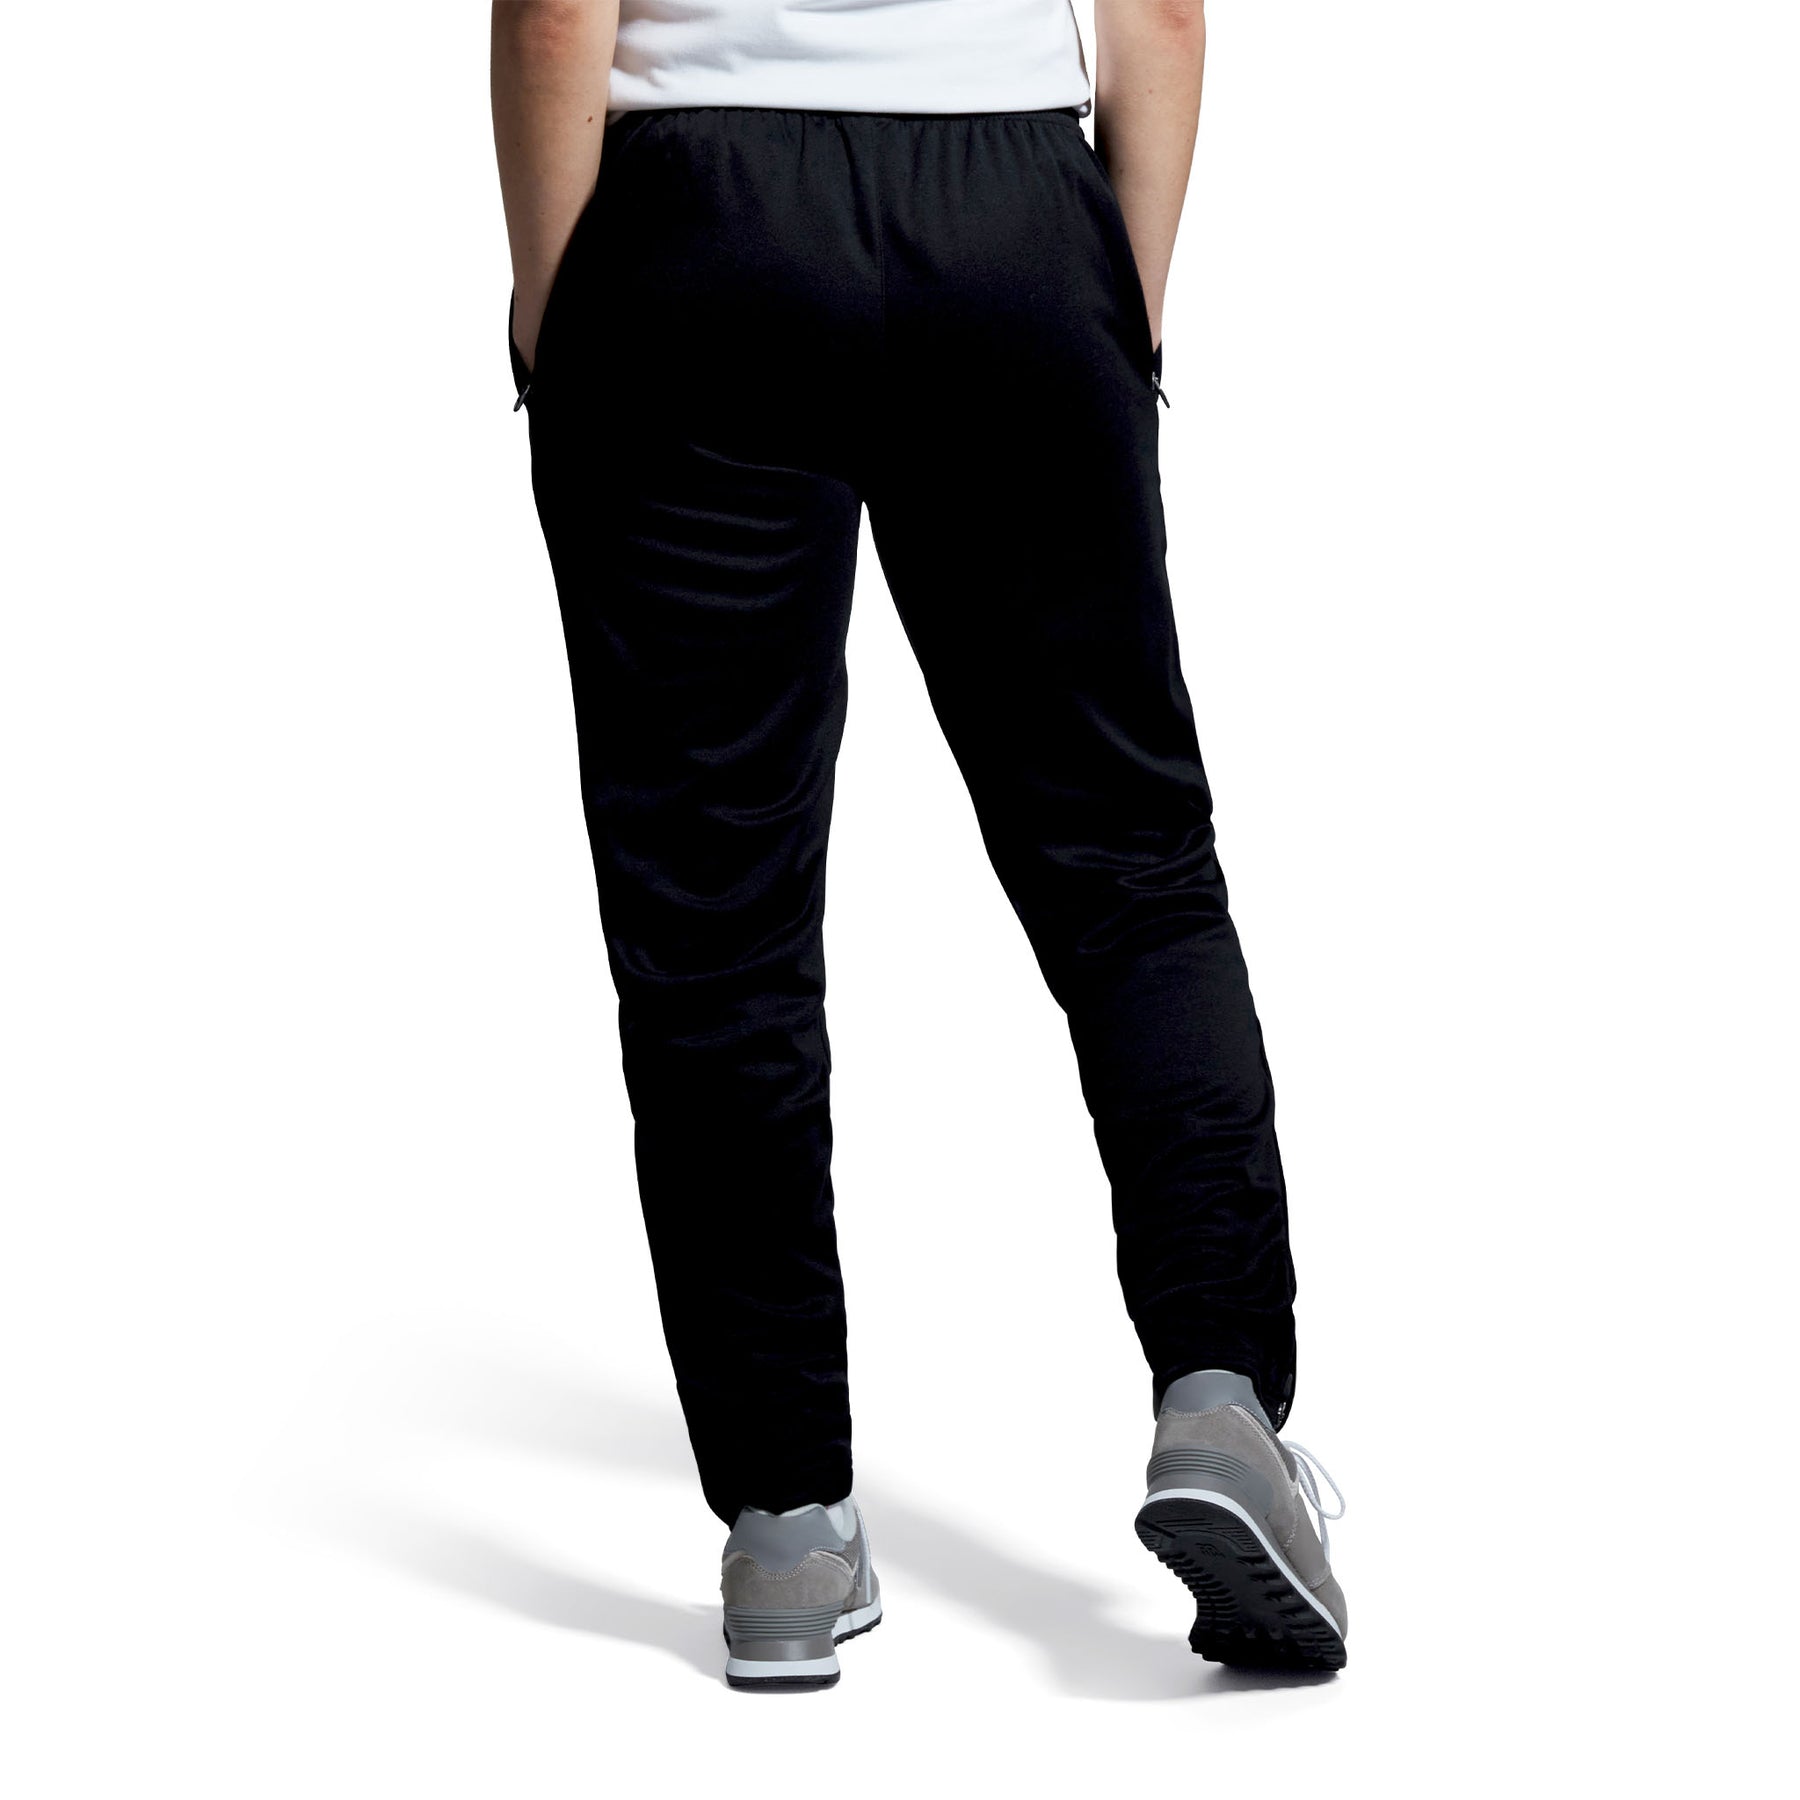 Marlow RFC Women's Tapered Stretch Pant